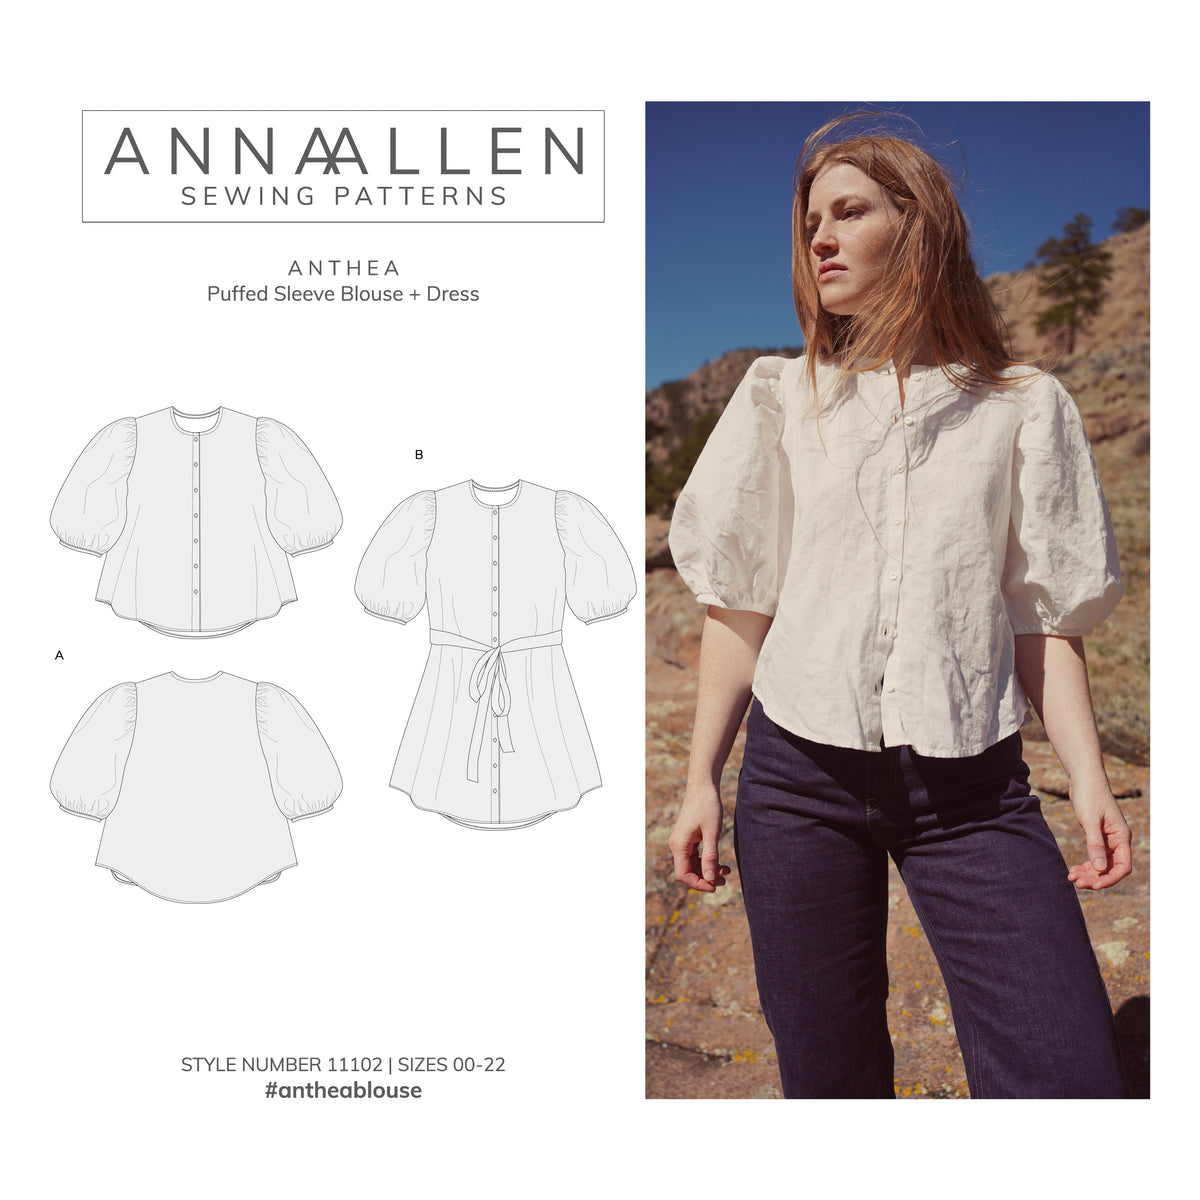 krom tand voorbeeld Anthea Blouse + Dress - PDF Sewing Pattern Sizes 00-22 – Anna Allen Clothing